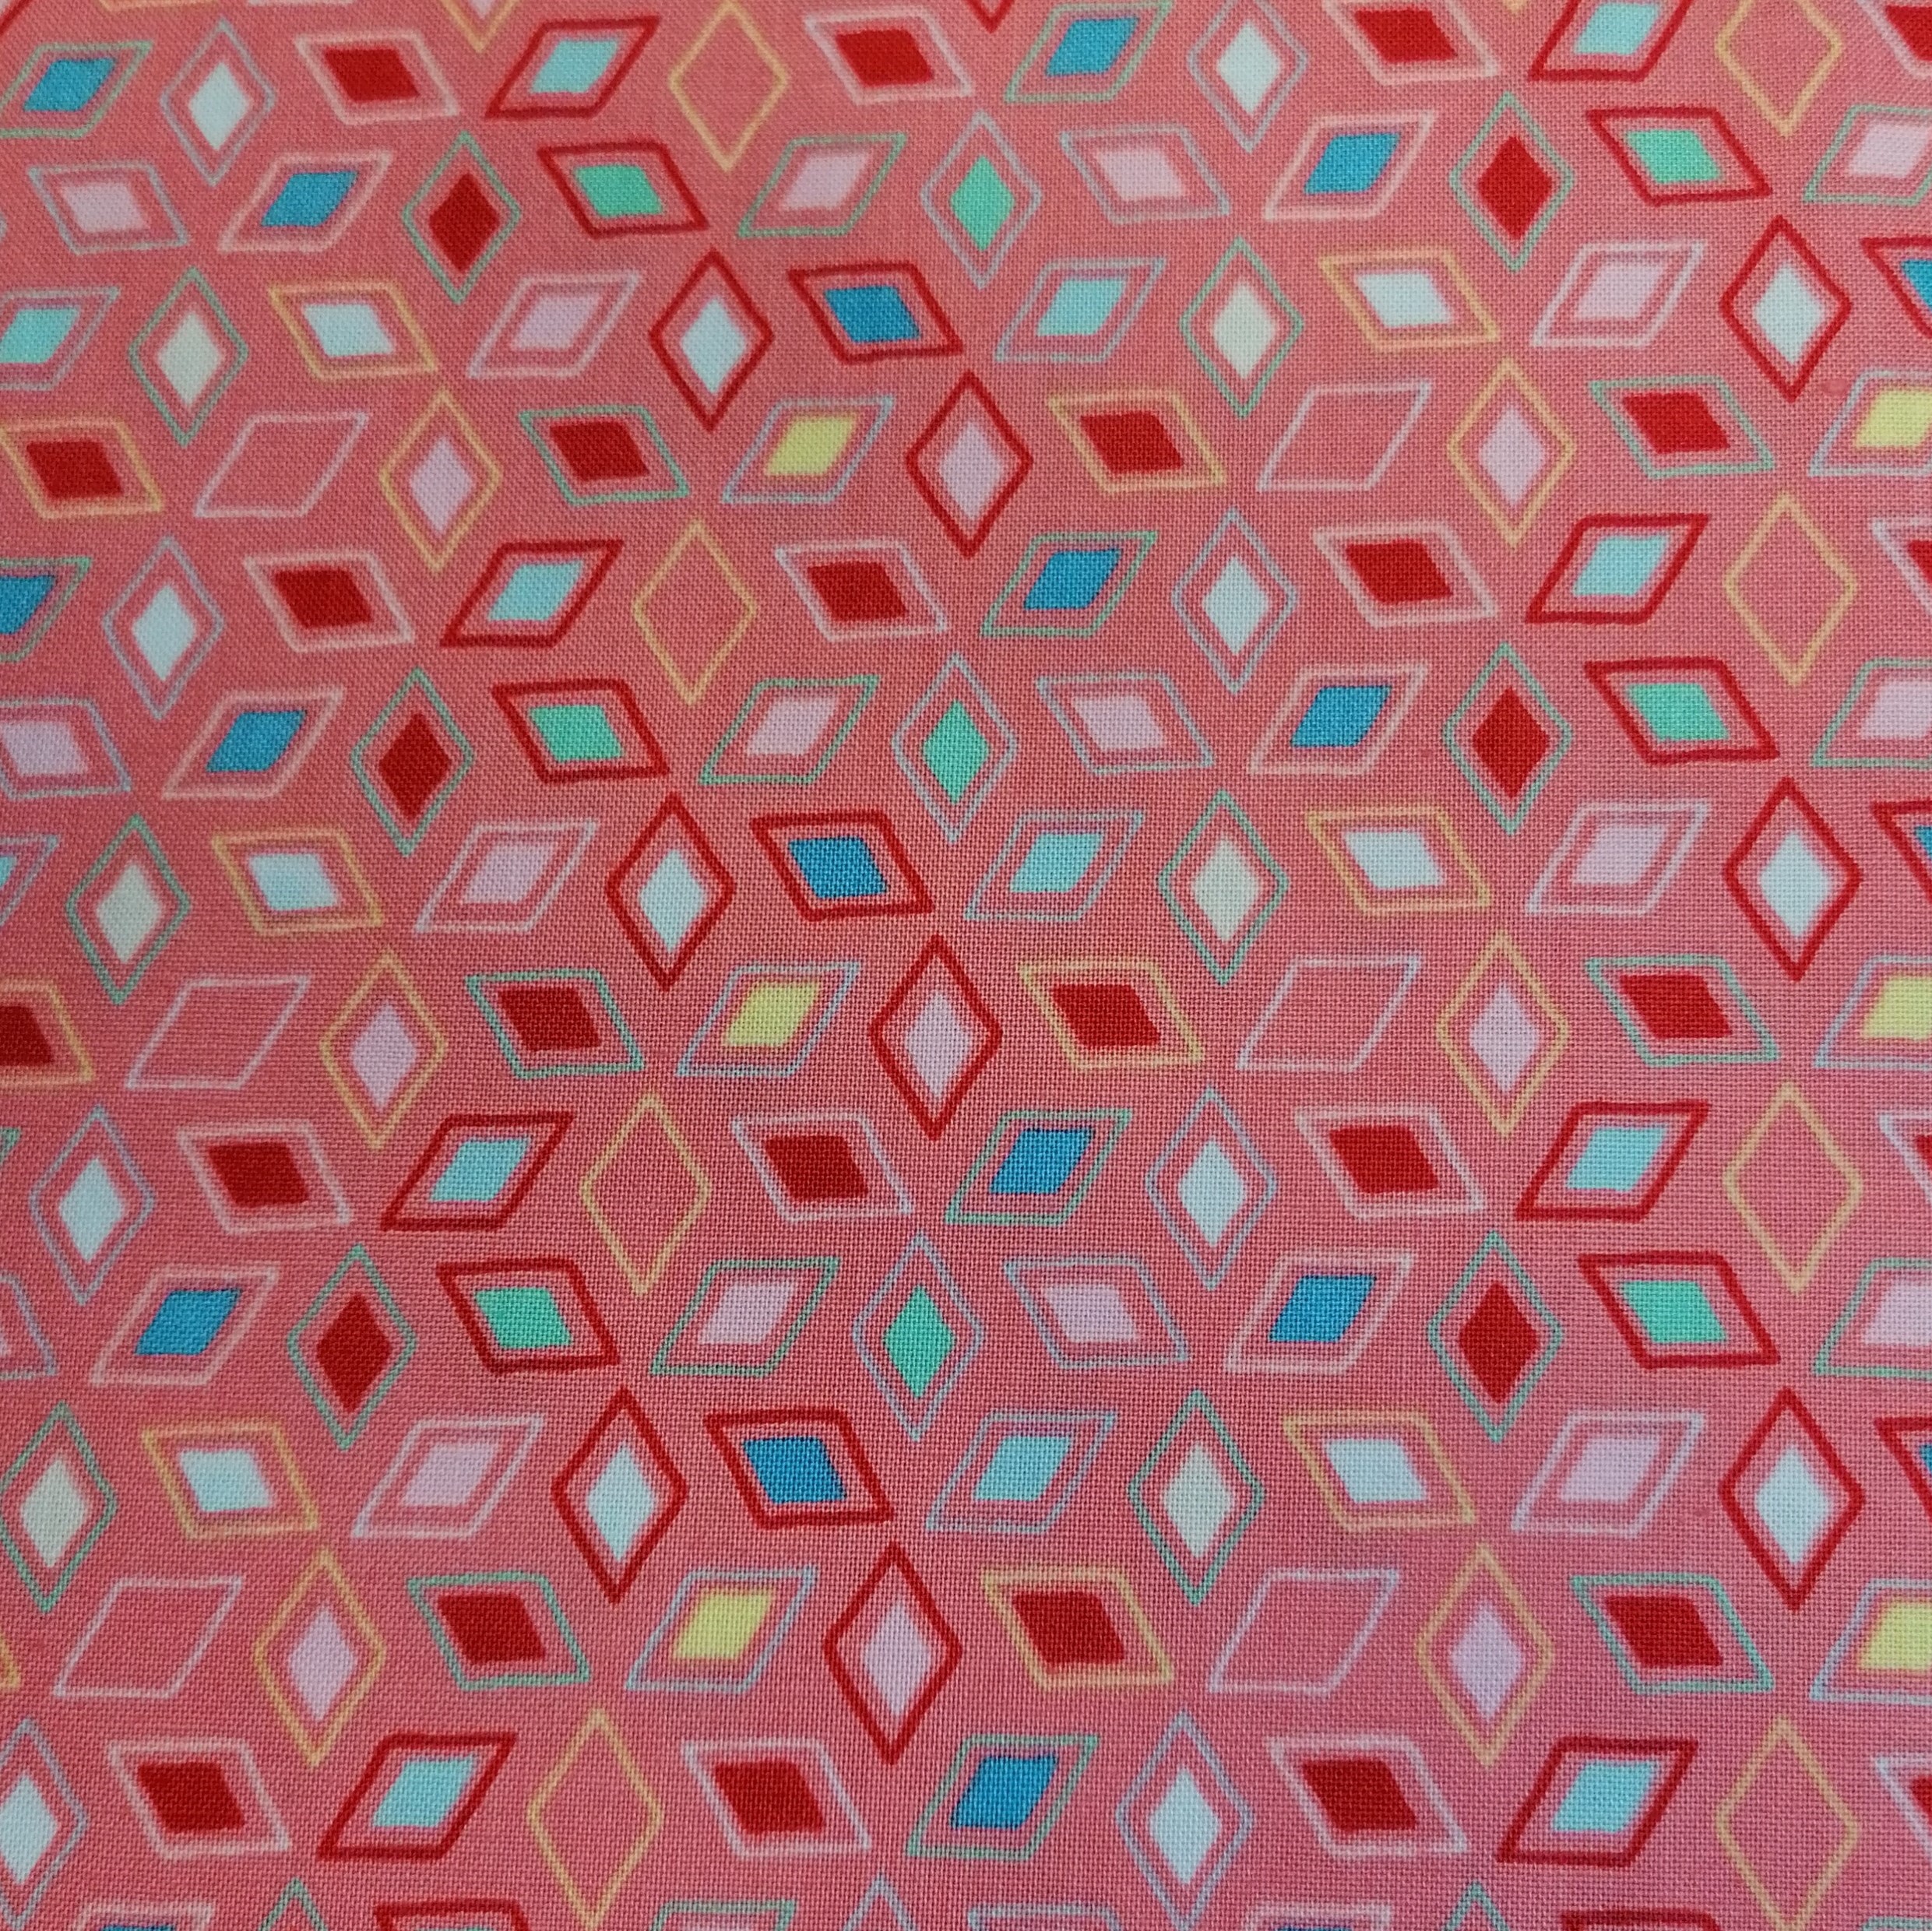 Quilting Fabric with Diamonds on Pink from Gypsy Soul by Basic Grey for Moda